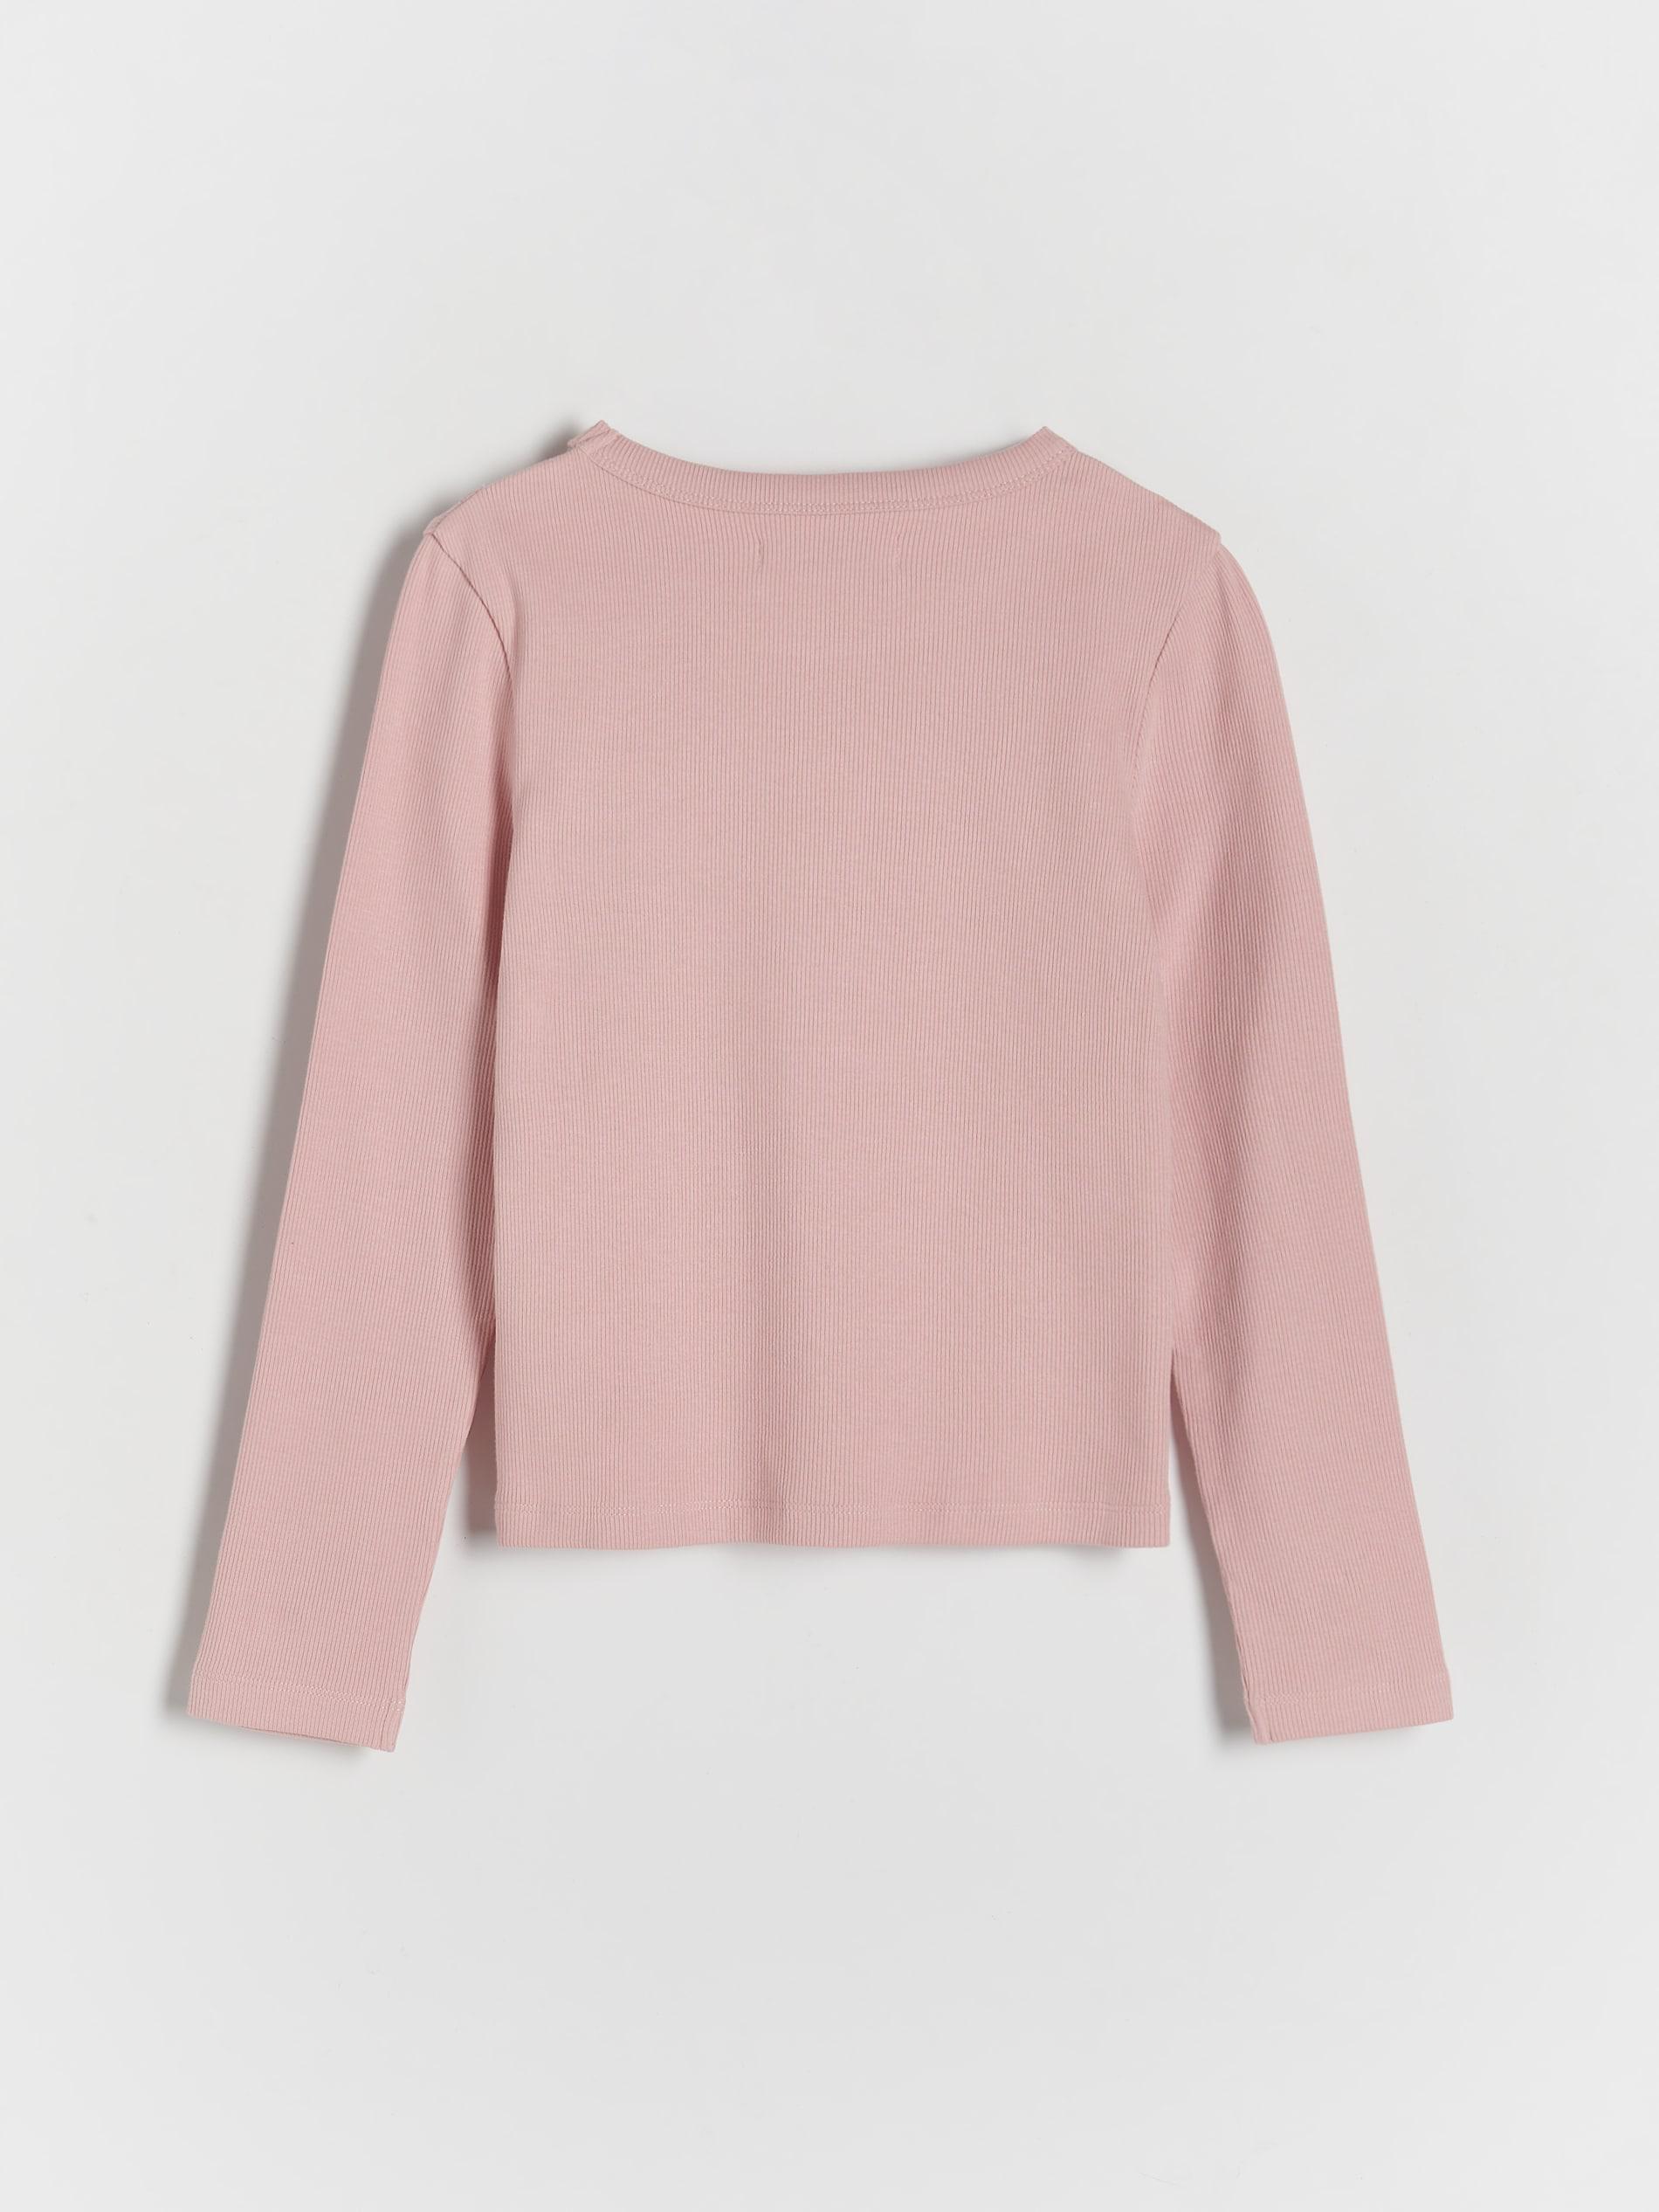 Reserved - Pink Shirt With Open Shoulders, Kids Girls